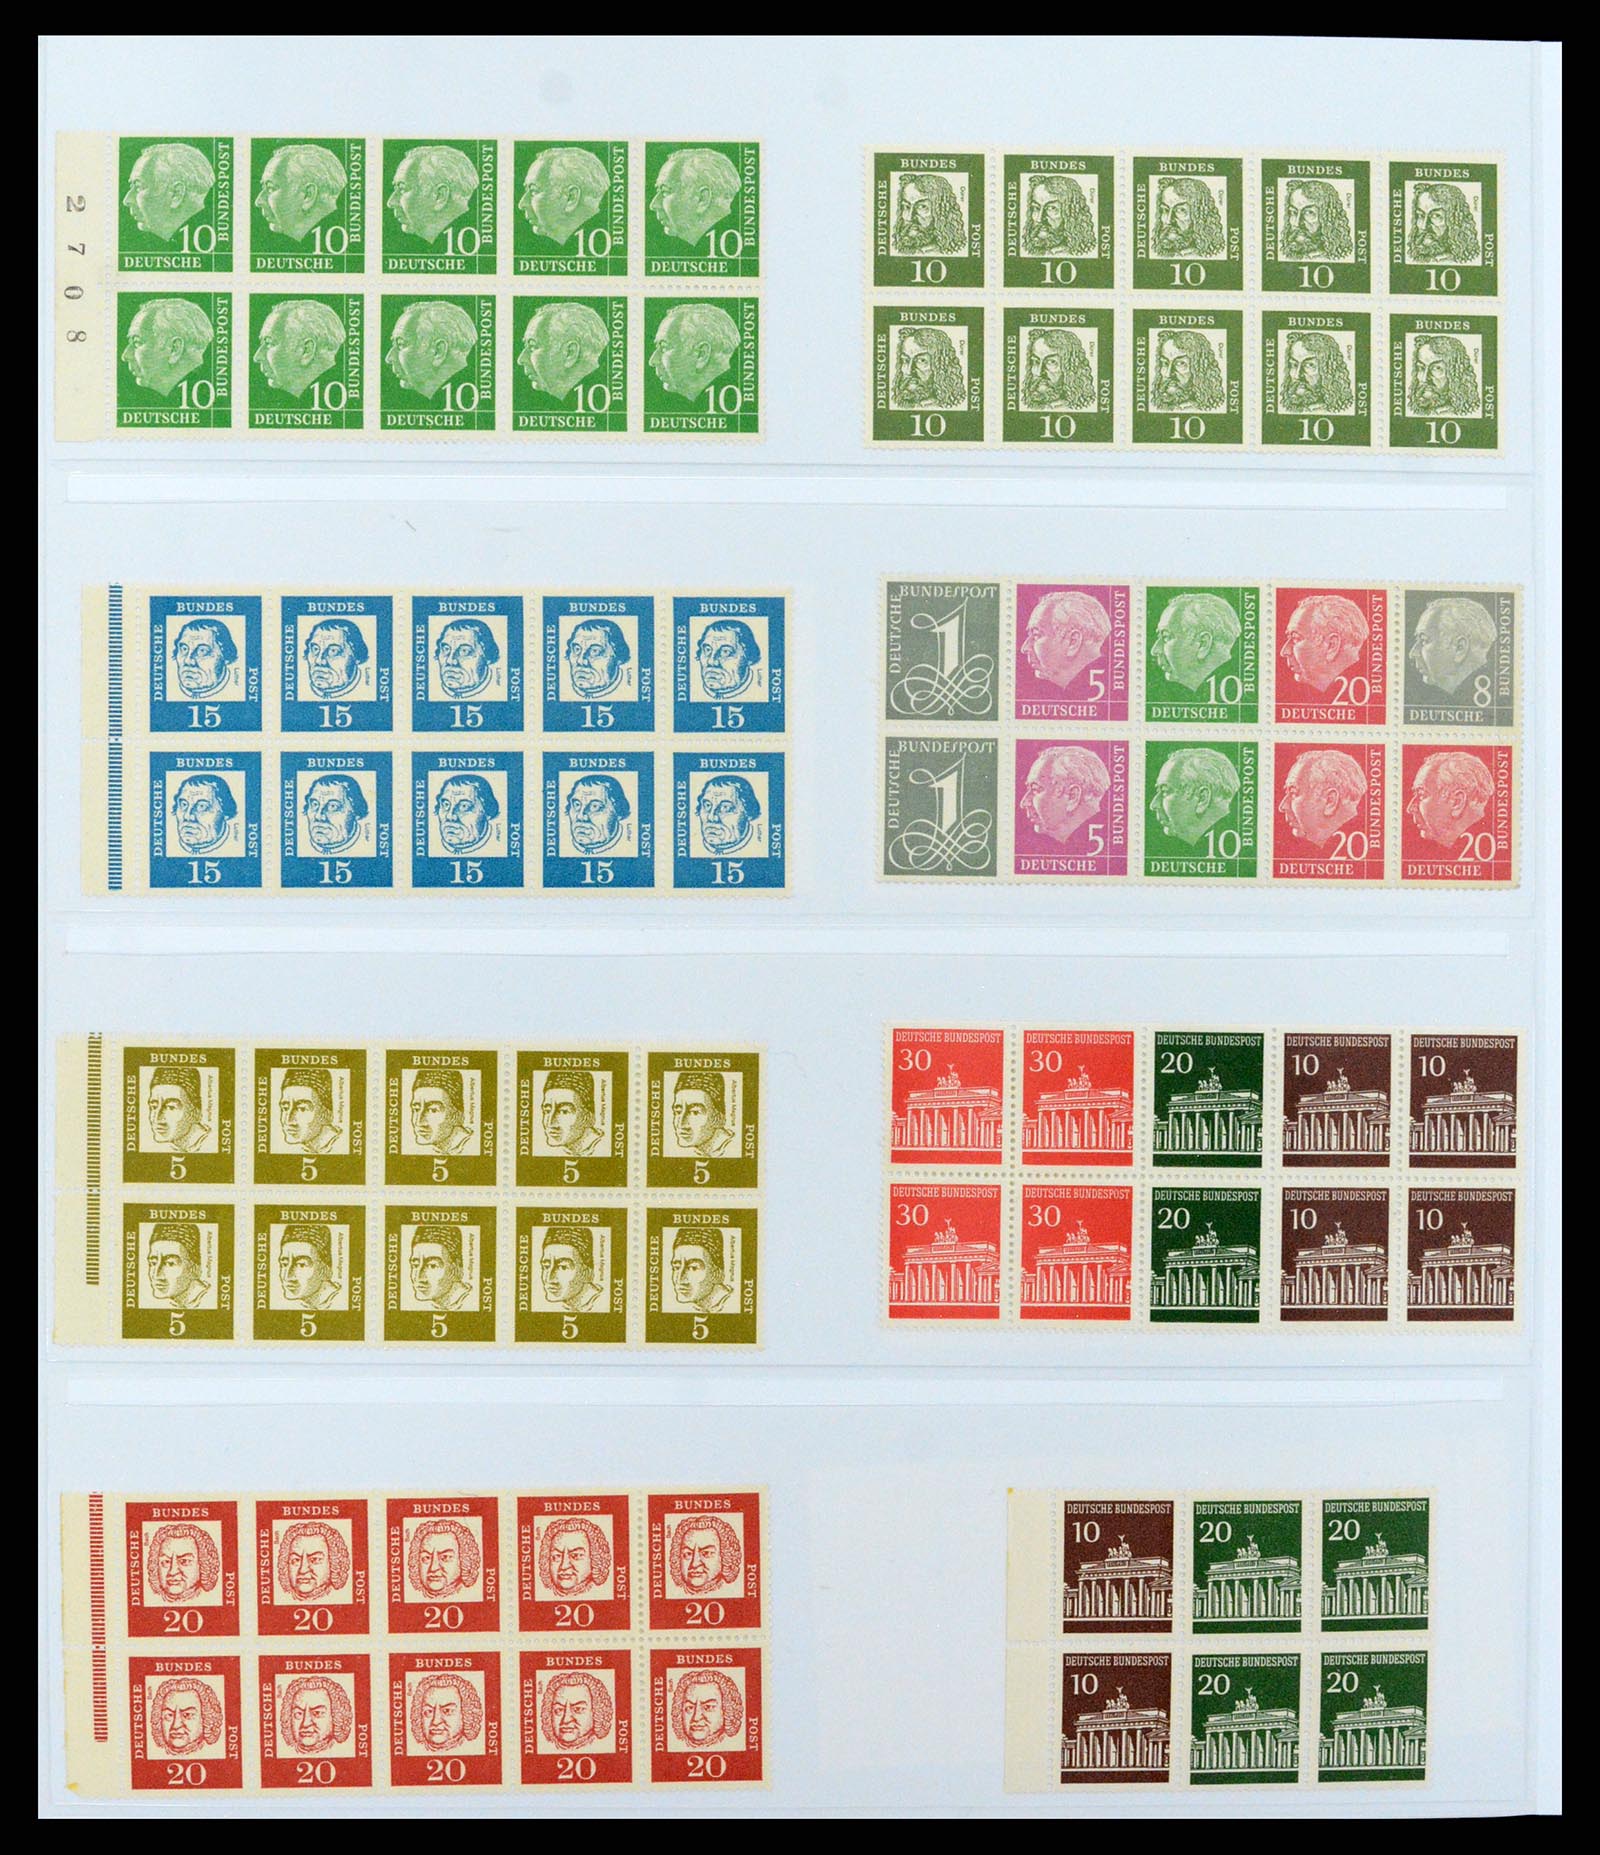 37336 018 - Stamp collection 37336 Bundespost combinations 1955-1980.